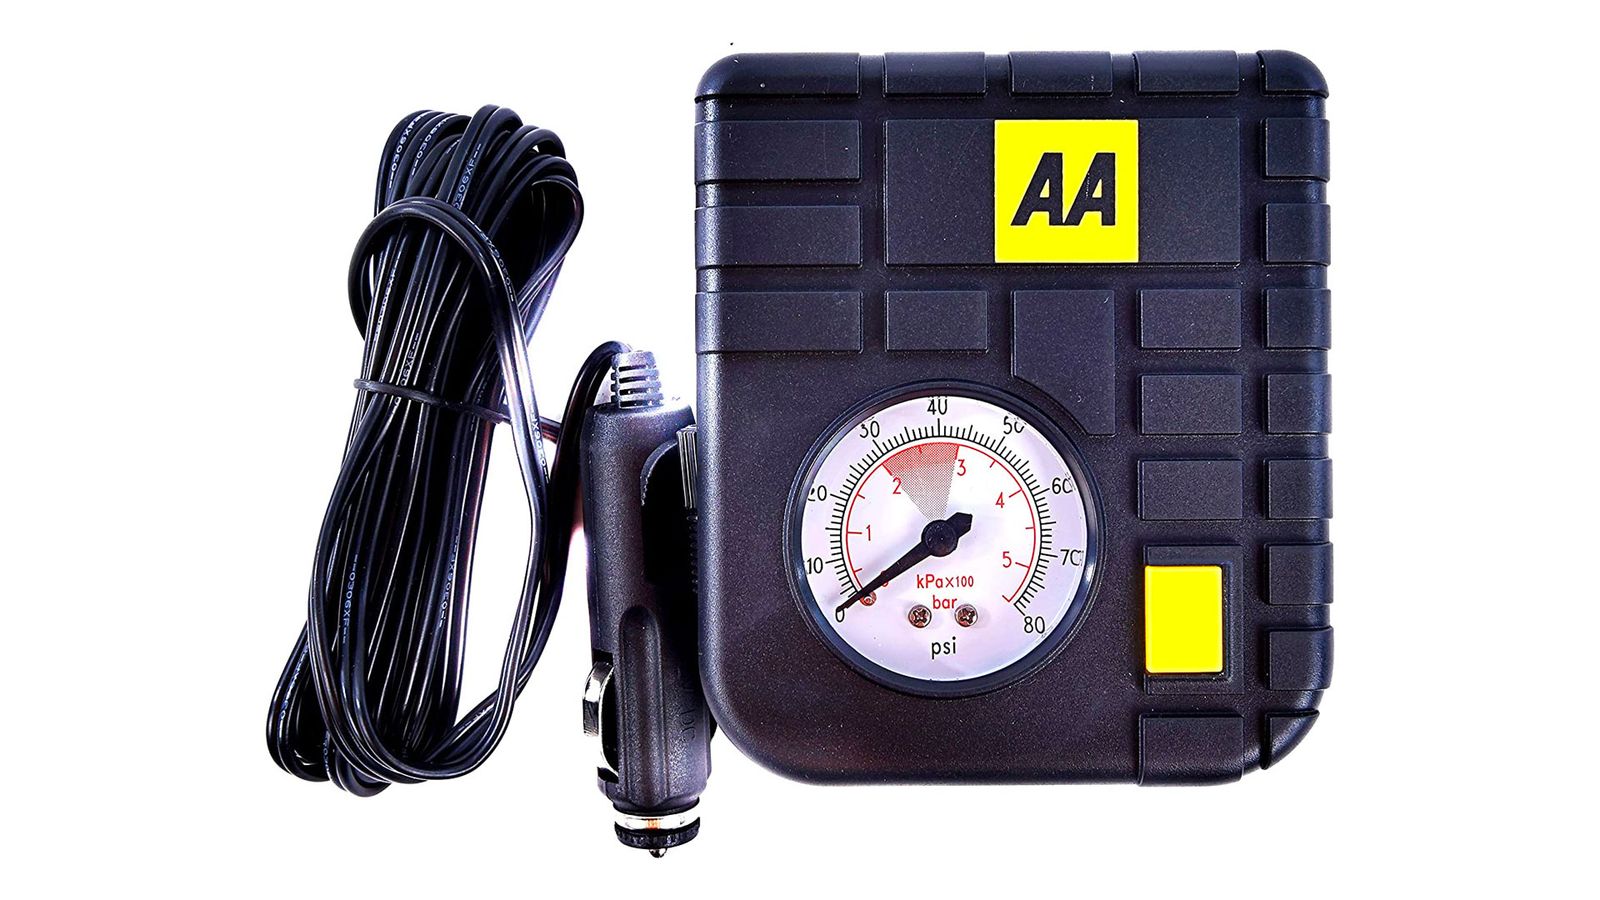 AA Car Essentials Compact Tyre Inflator AA5007 product image of a compact black and yellow machine with an analogue air pressure gauge.